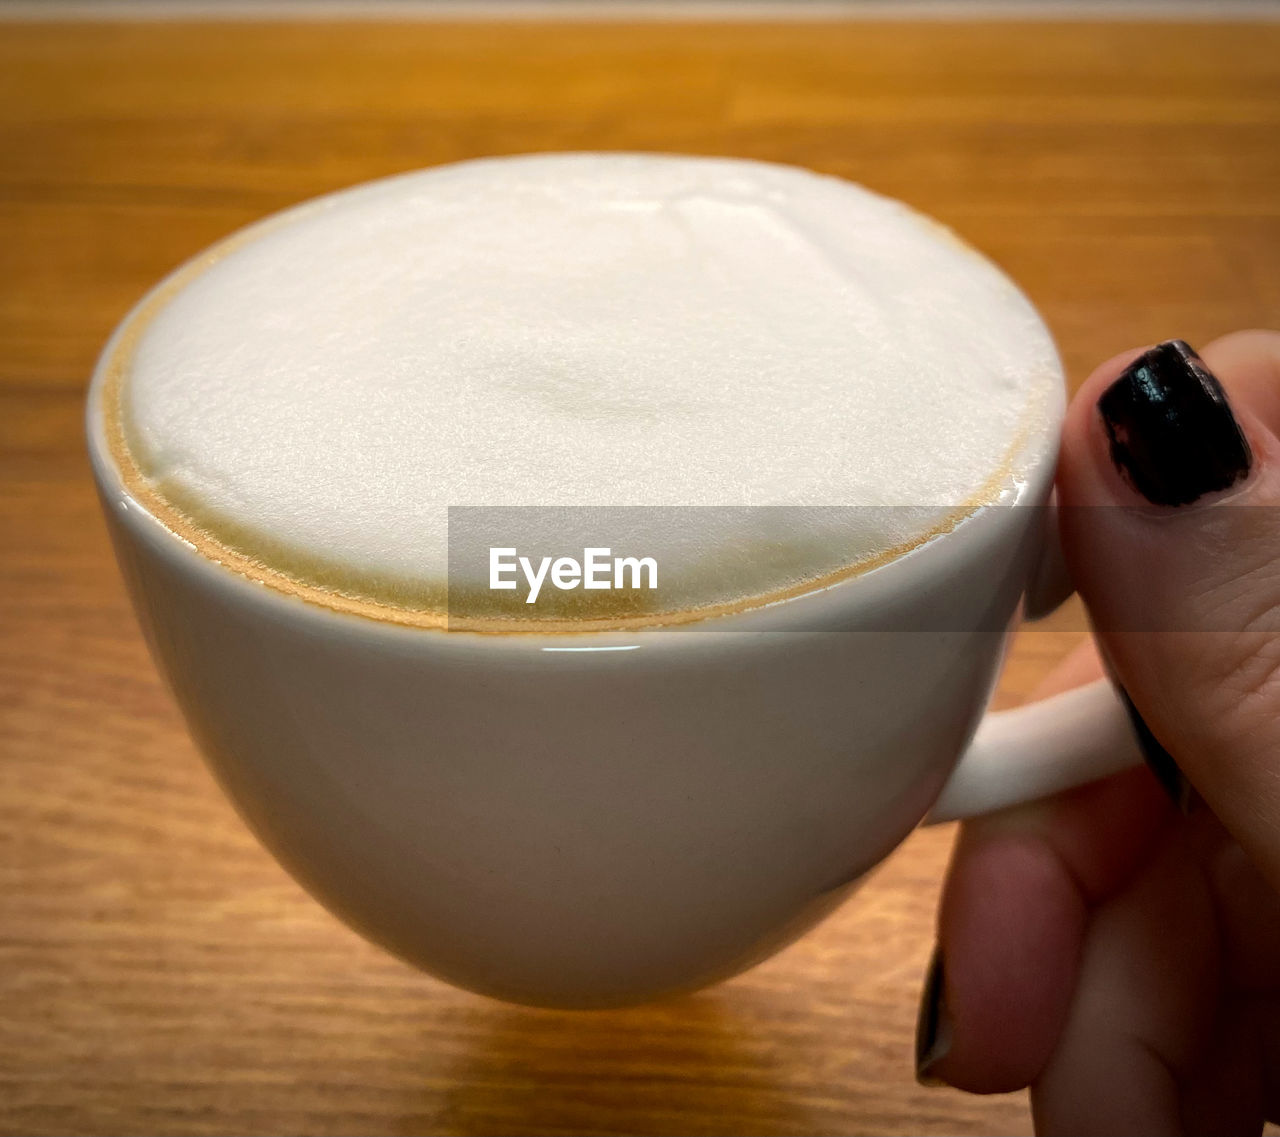 food and drink, drink, hand, refreshment, frothy drink, holding, one person, food, cup, indoors, latte, coffee, mug, close-up, hot drink, table, freshness, coffee cup, cappuccino, lifestyles, focus on foreground, wood, finger, adult